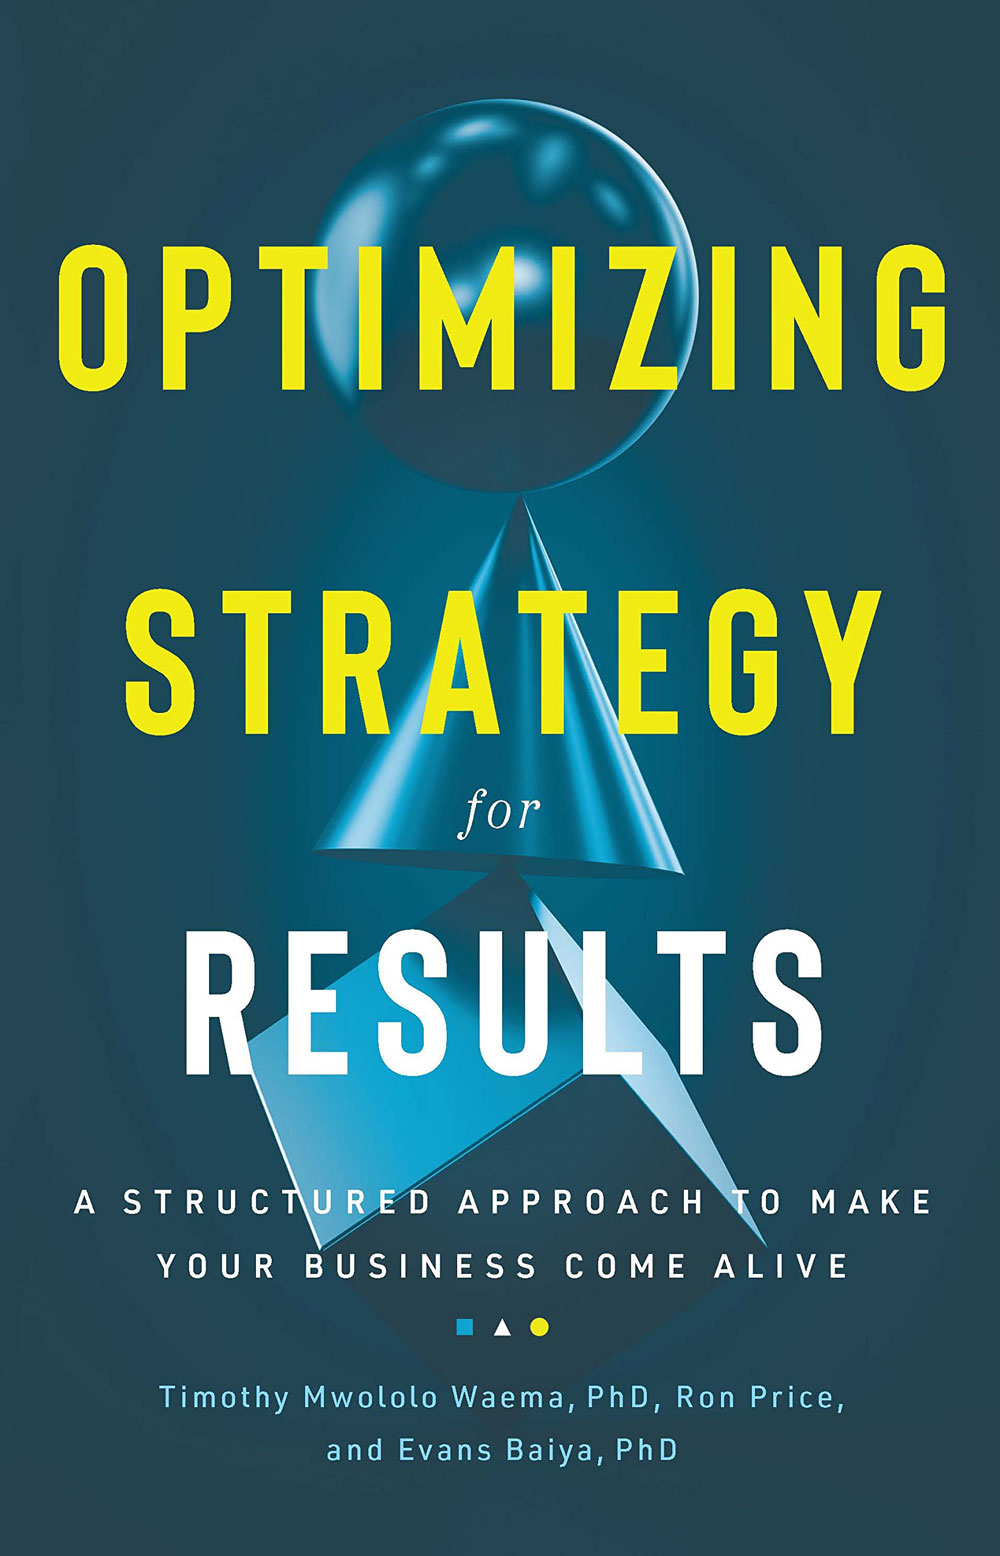 Optimizing Strategy For Results: A Structured Approach to Make Your Business Come Alive